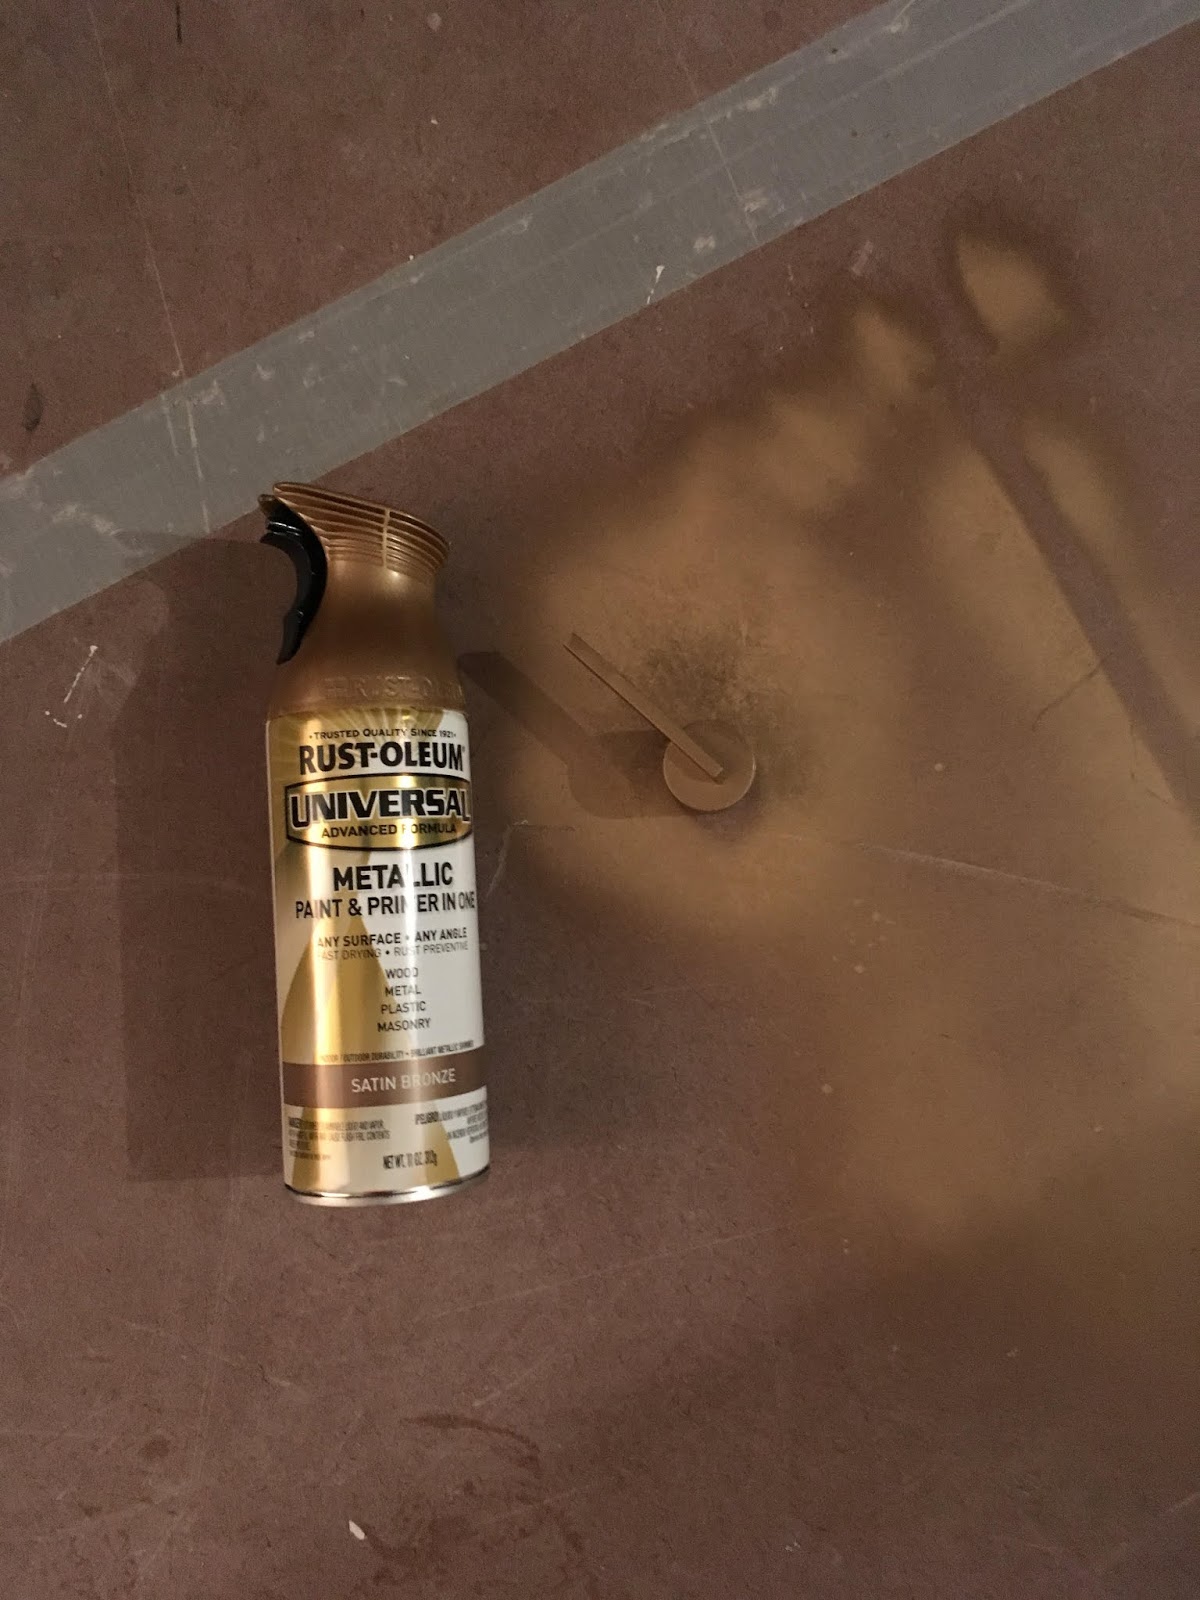 Renov8or: This Spray Paint Is a Perfect Match for Delta Champagne